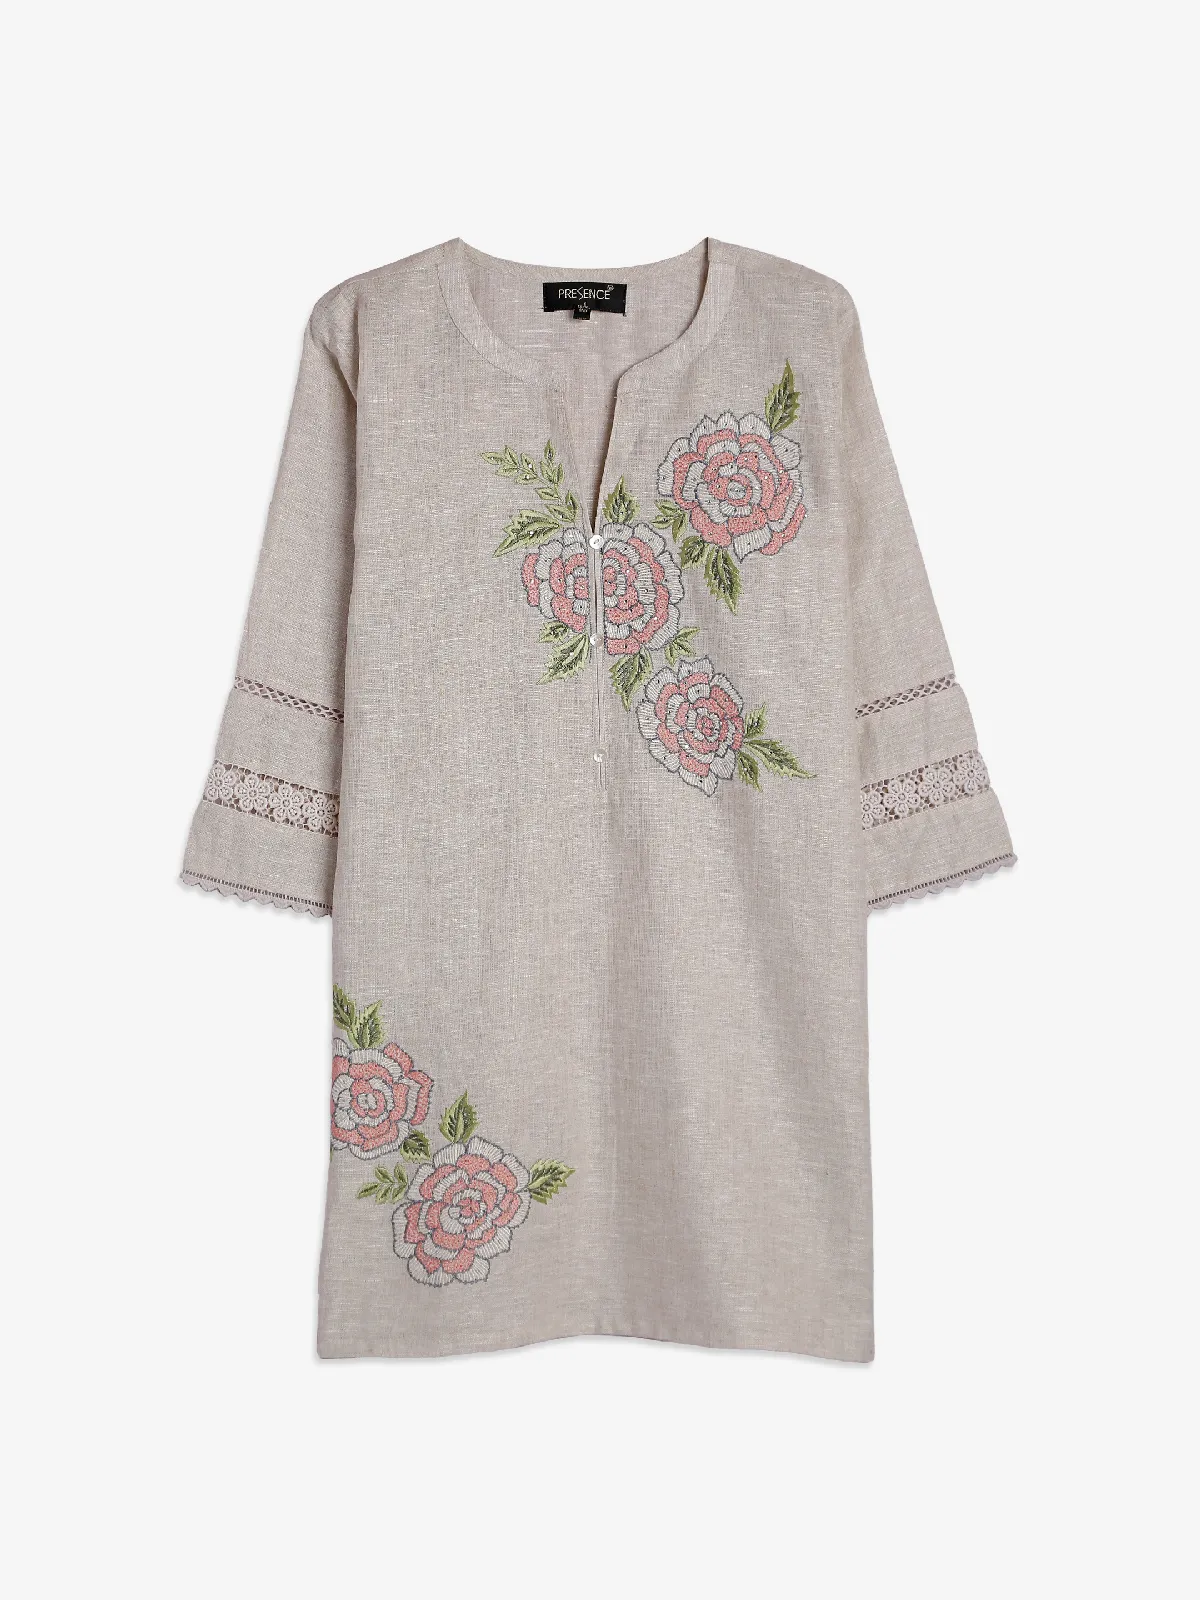 Beige cotton embroidery tunic top